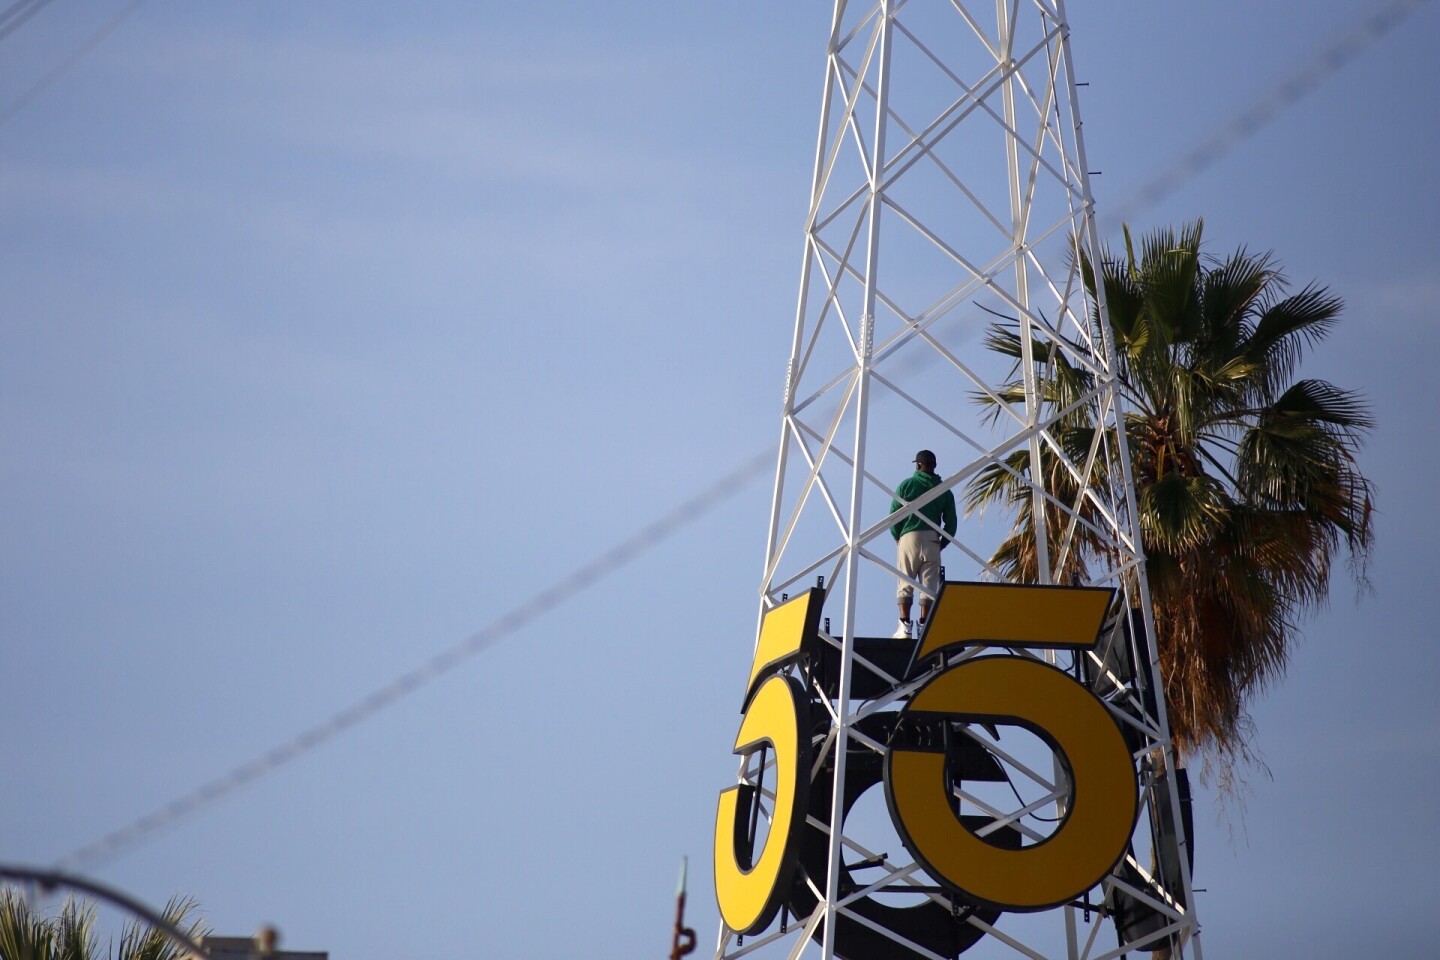 A man climbed KTLA's iconic Hollywood tower on Wednesday, prompting the closure of Sunset Boulevard near Bronson Avenue.